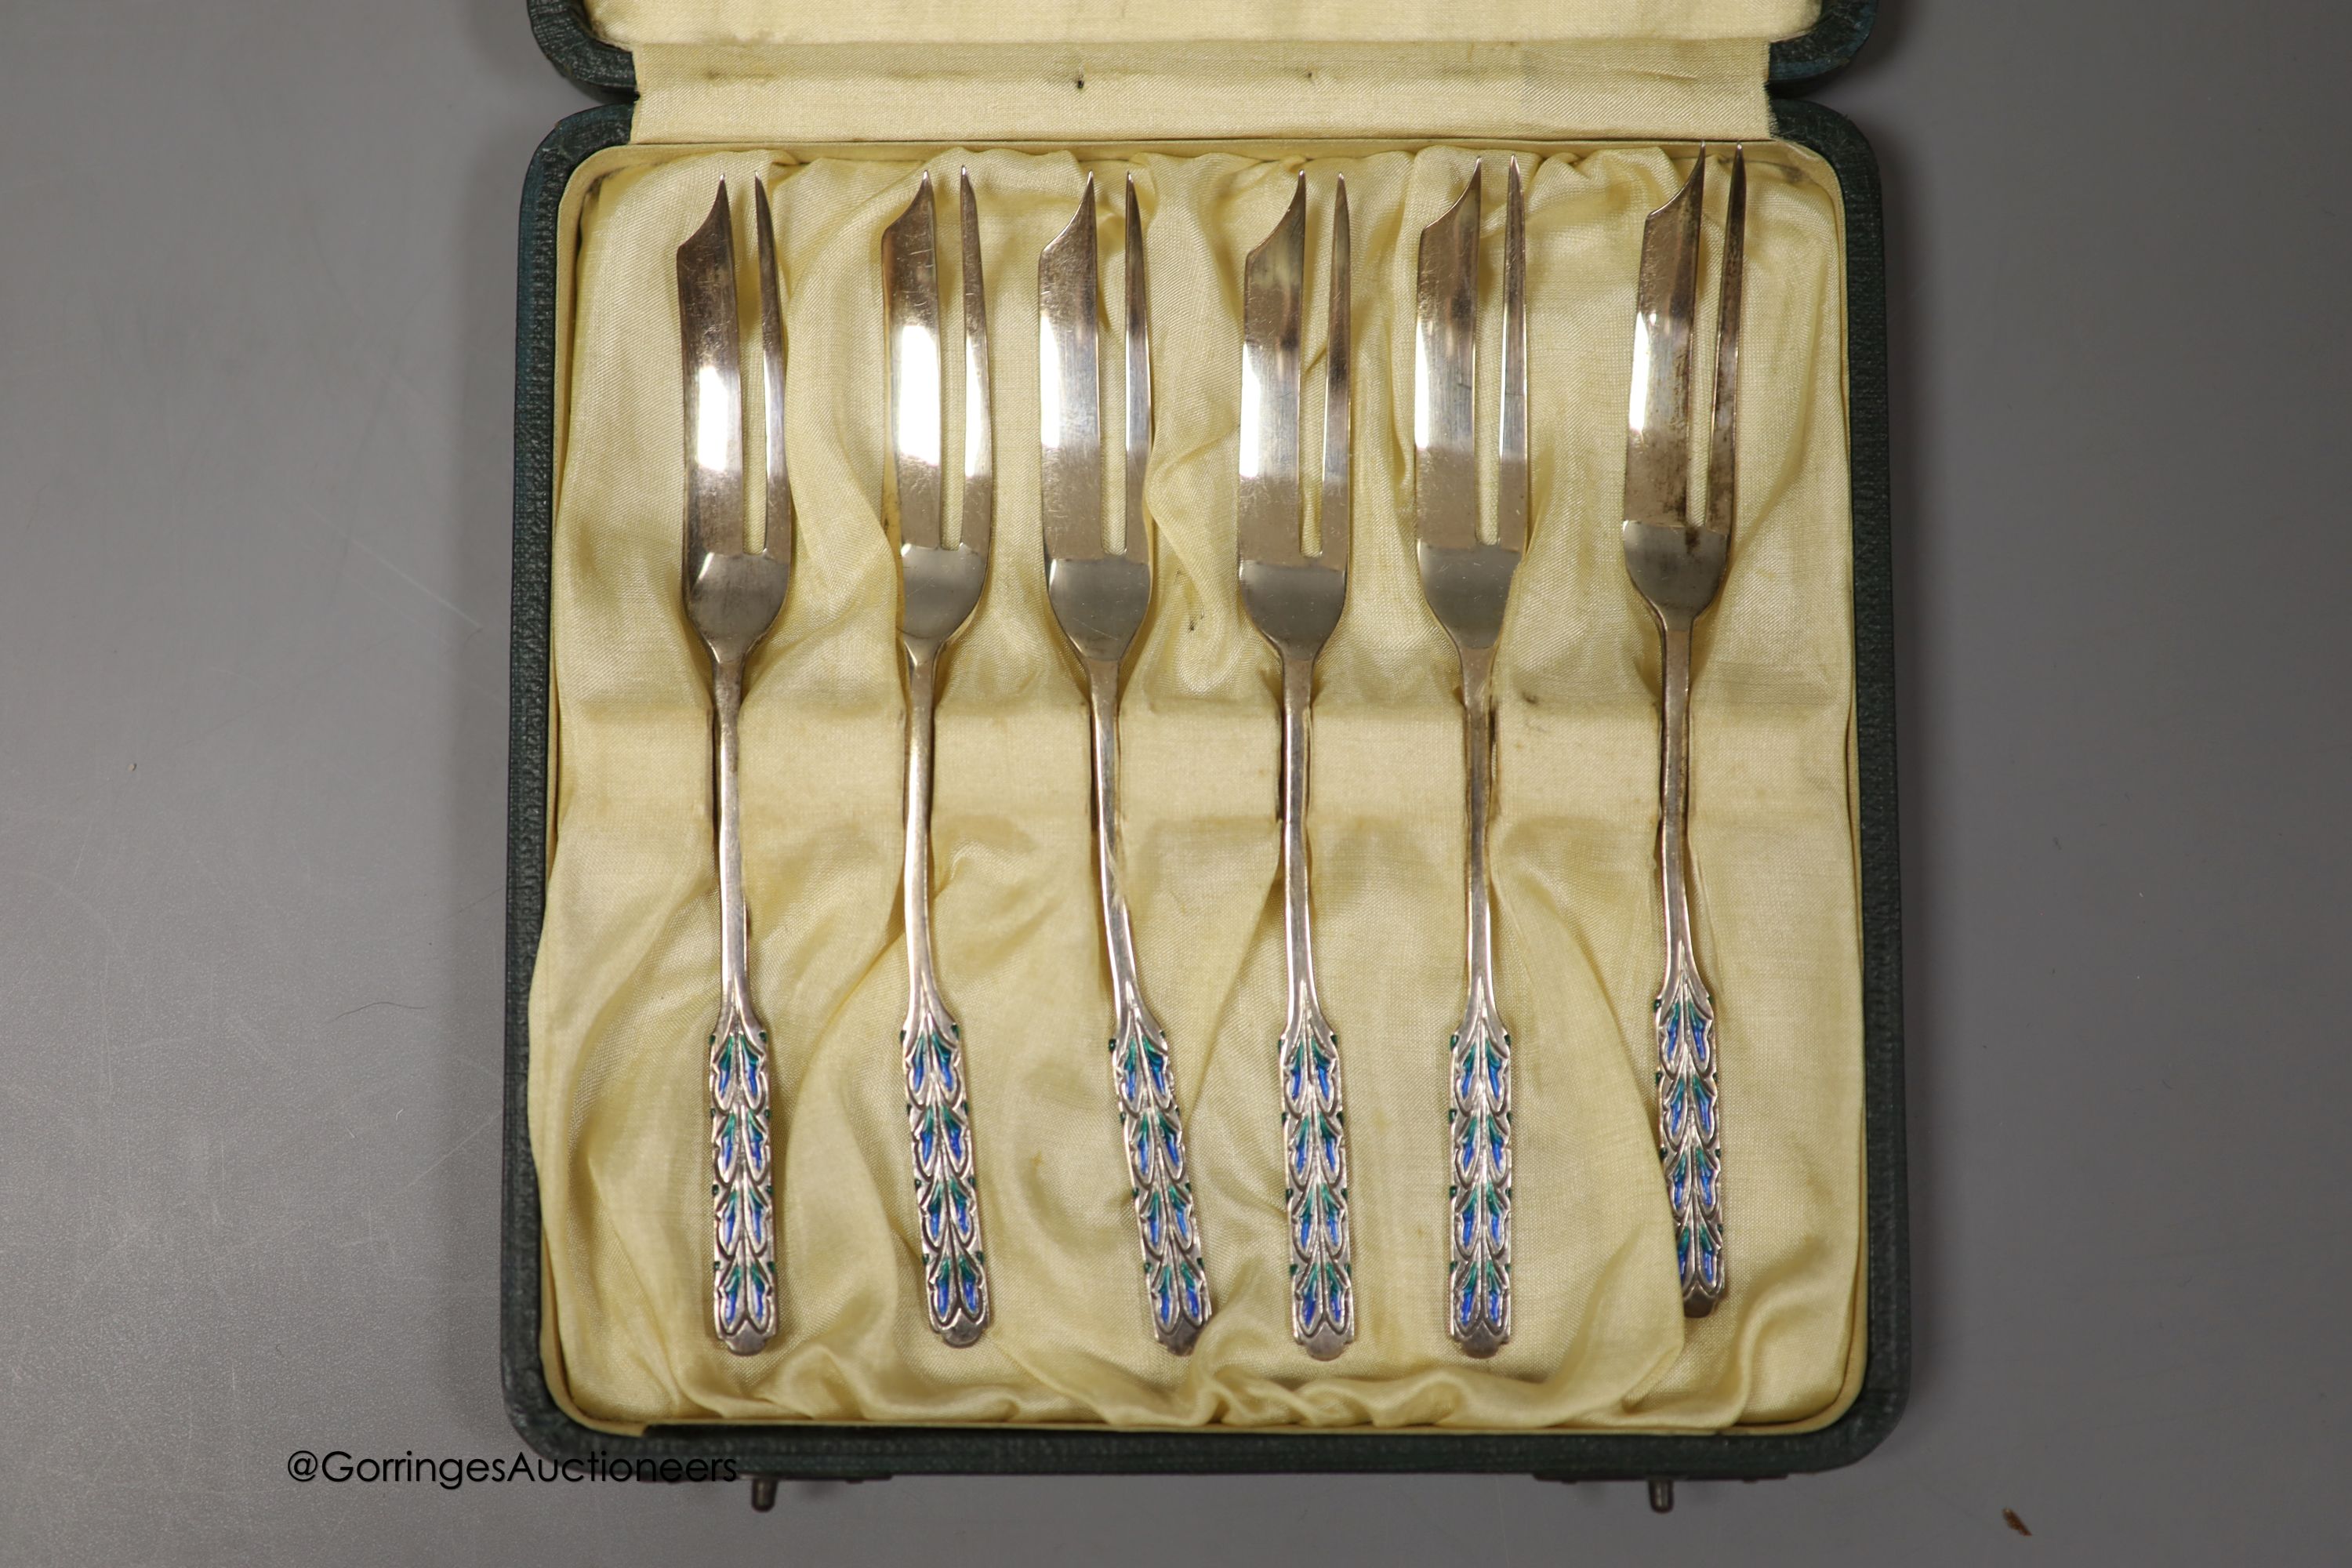 A cased set of George V Liberty & Co silver and enamel pastry forks, Birmingham, 1928, in original Liberty & Co box